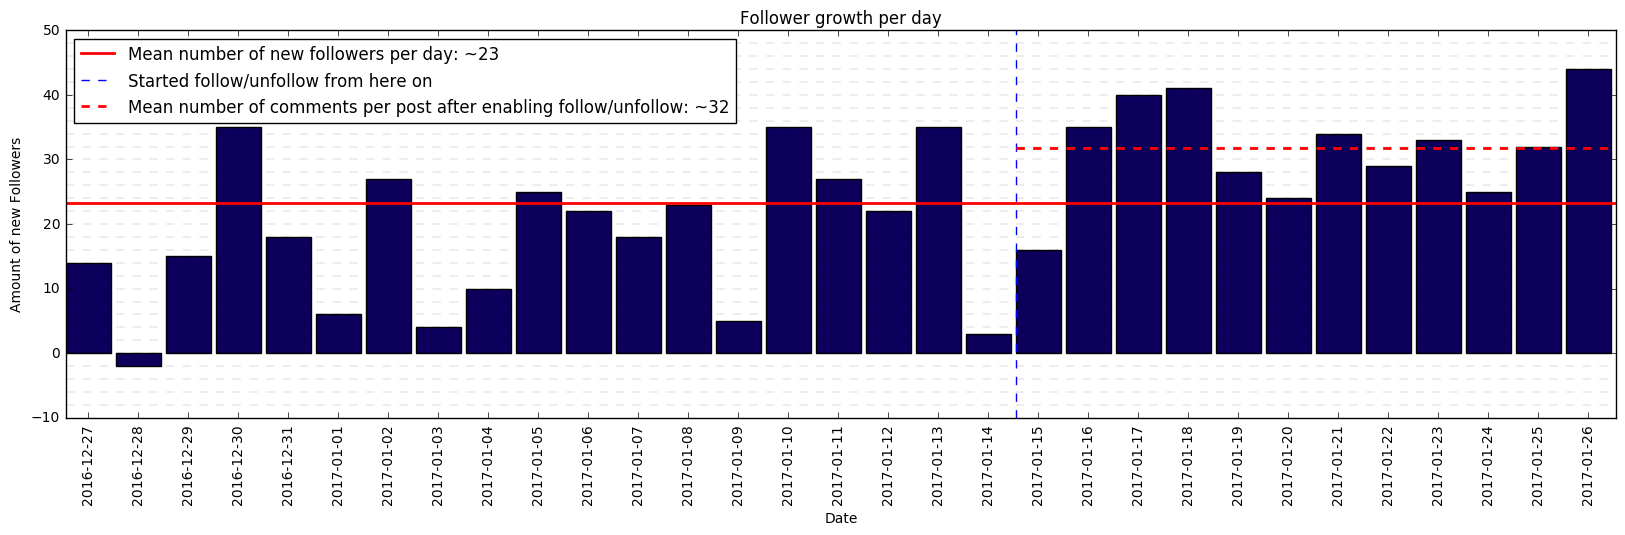 follower growth per day in the second month - unfollow my followers instagram